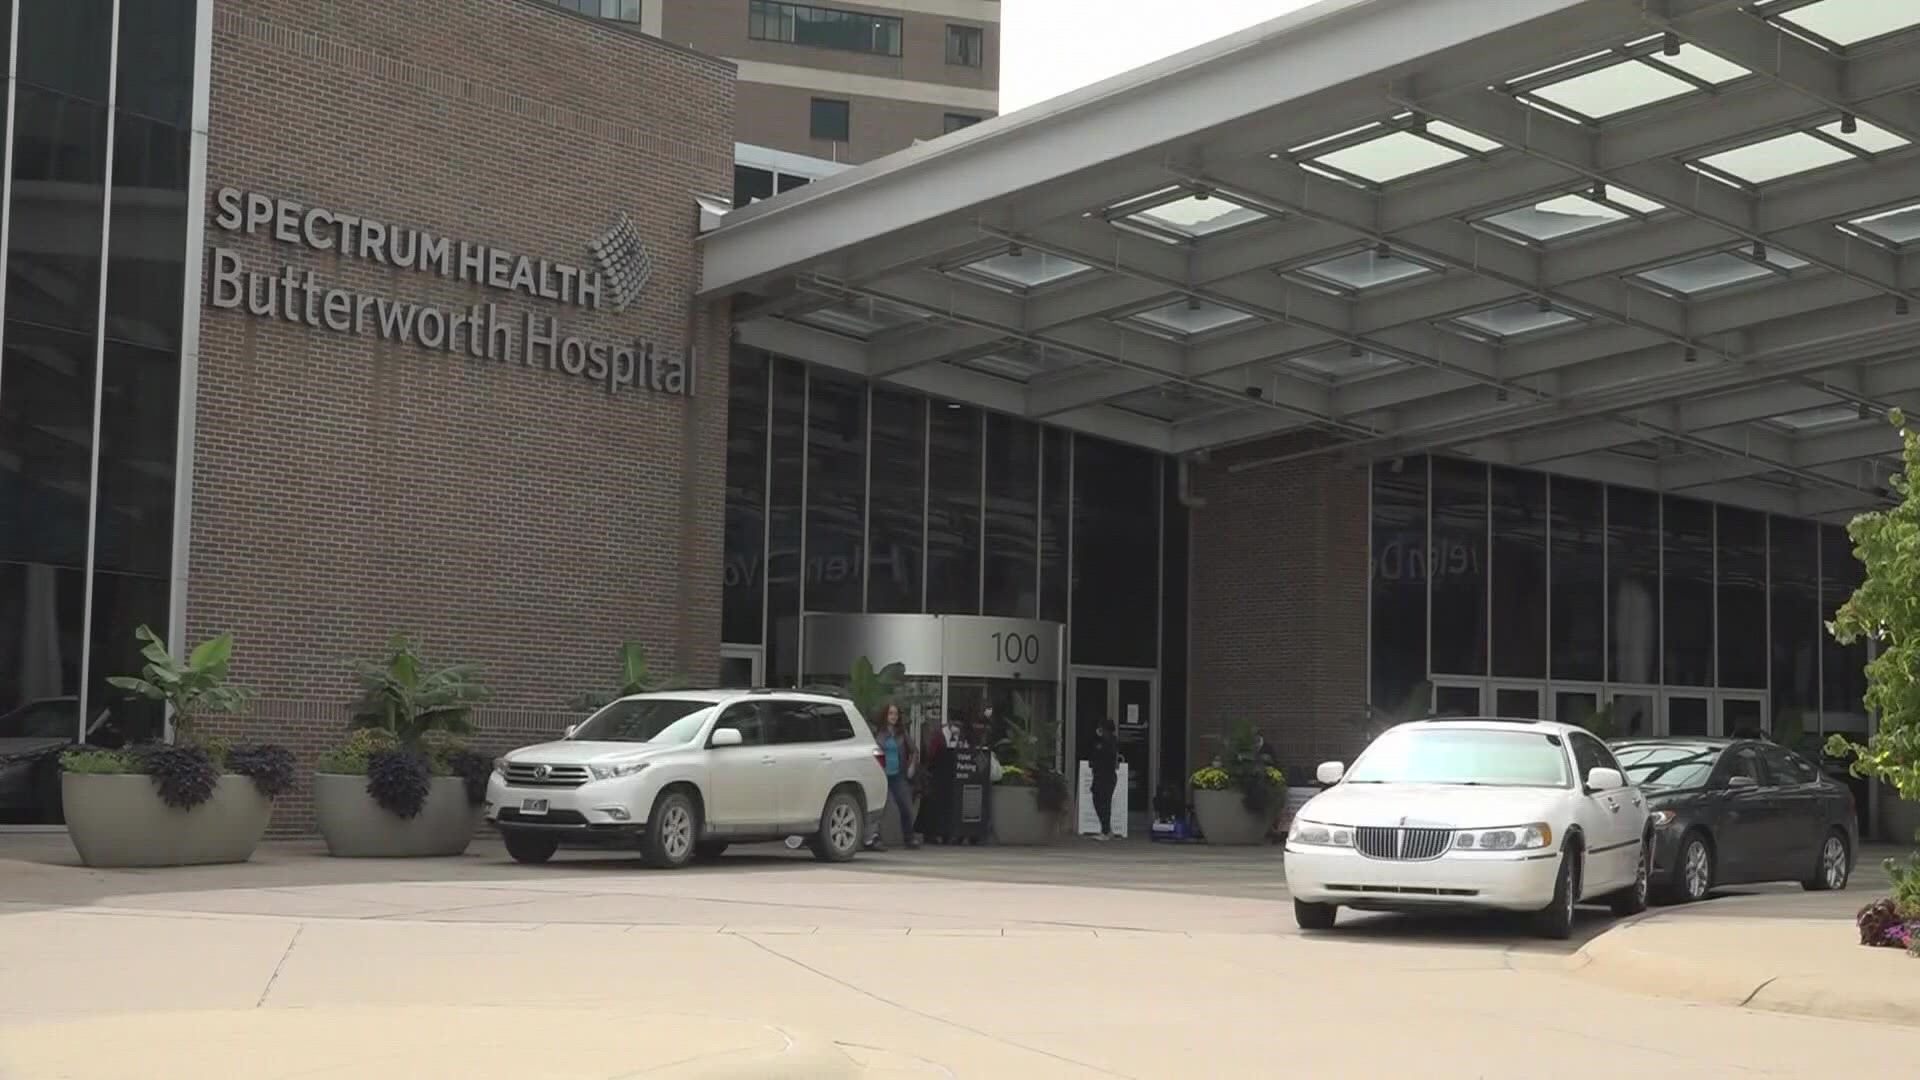 West Michigan's largest hospitals provided an update Friday on the status of COVID-19 and the strain it is putting on their facilities and workers.